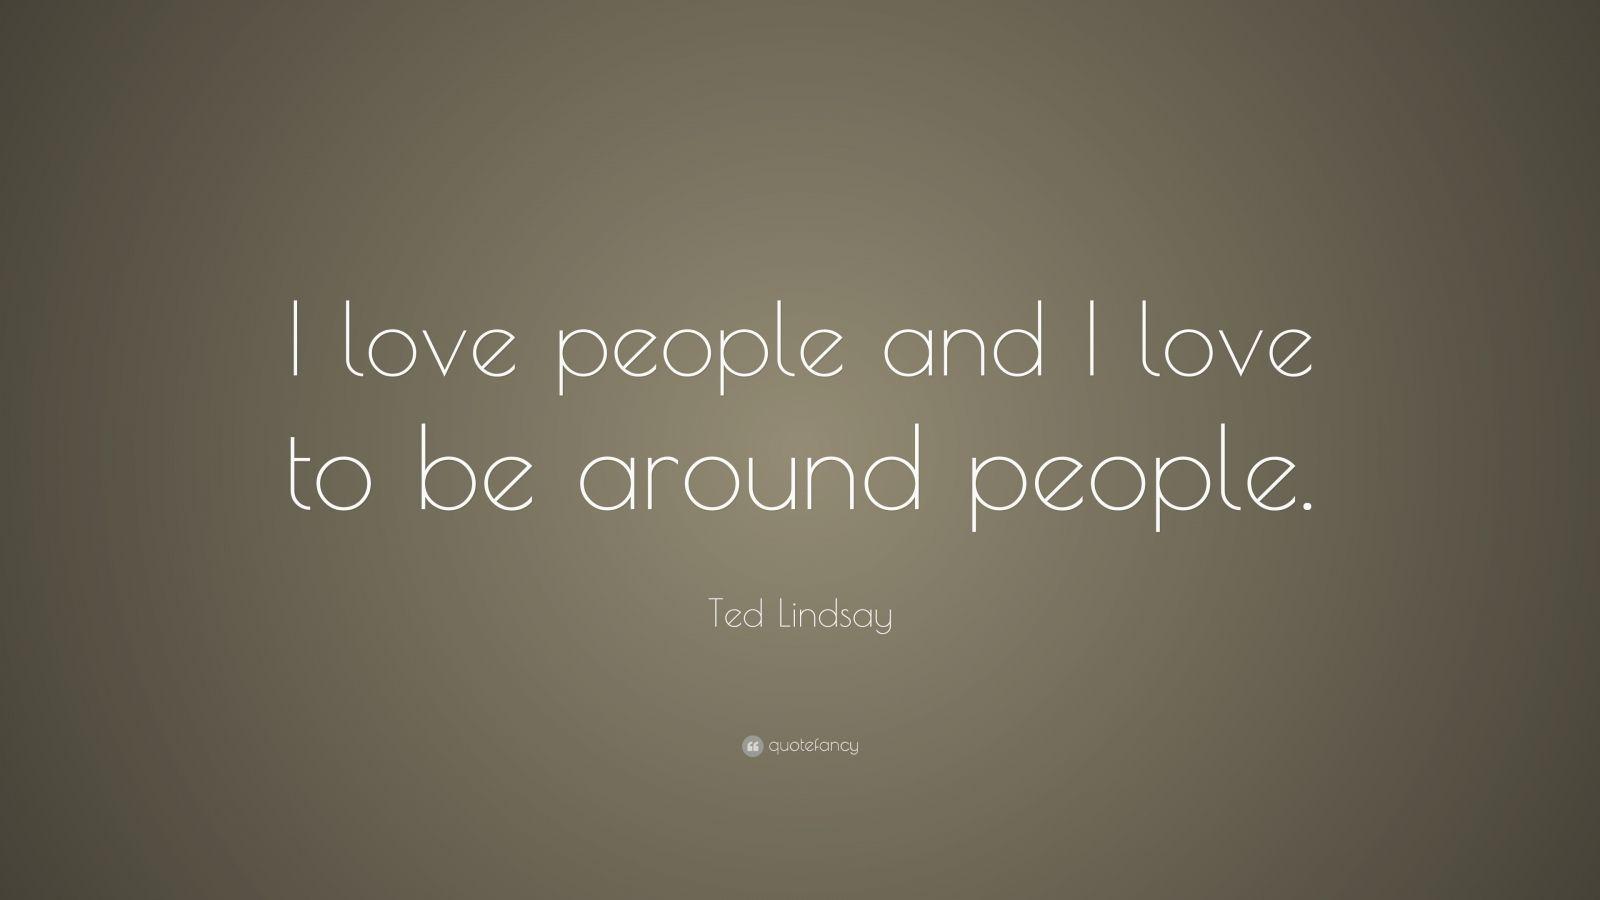 Ted Lindsay Quote: “I love people and I love to be around people